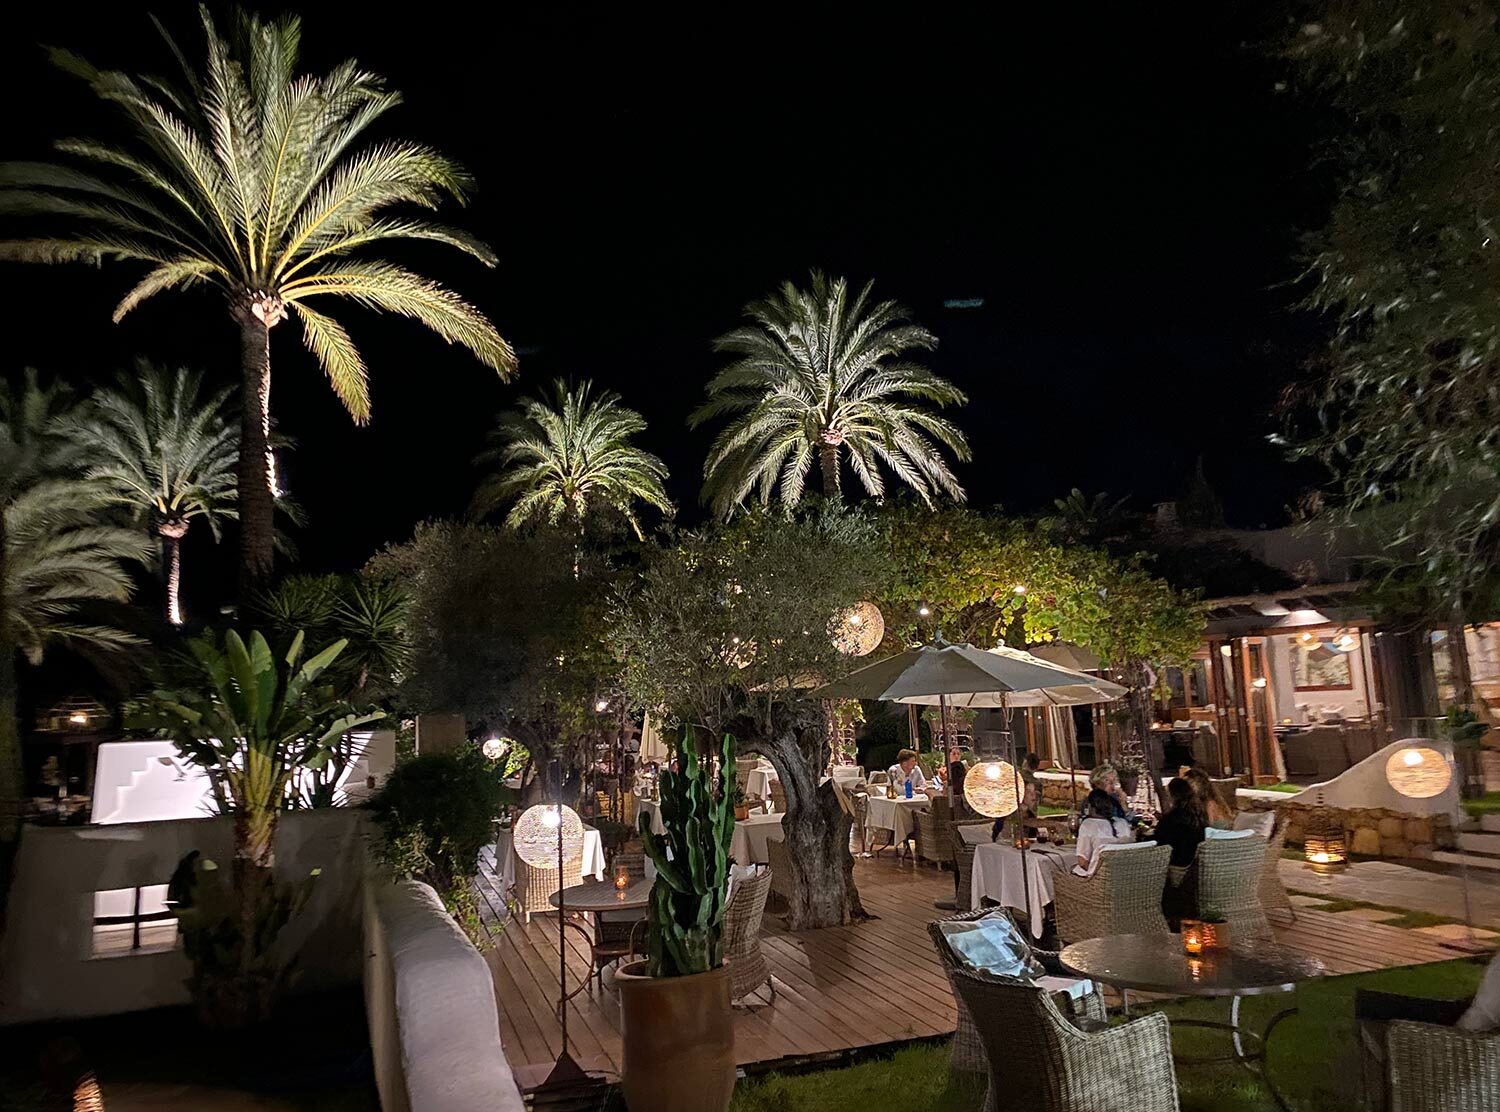 Atzaró Agroturismo Hotel The gardens and common spaces at night. There's a robust program of activations throughout the summer